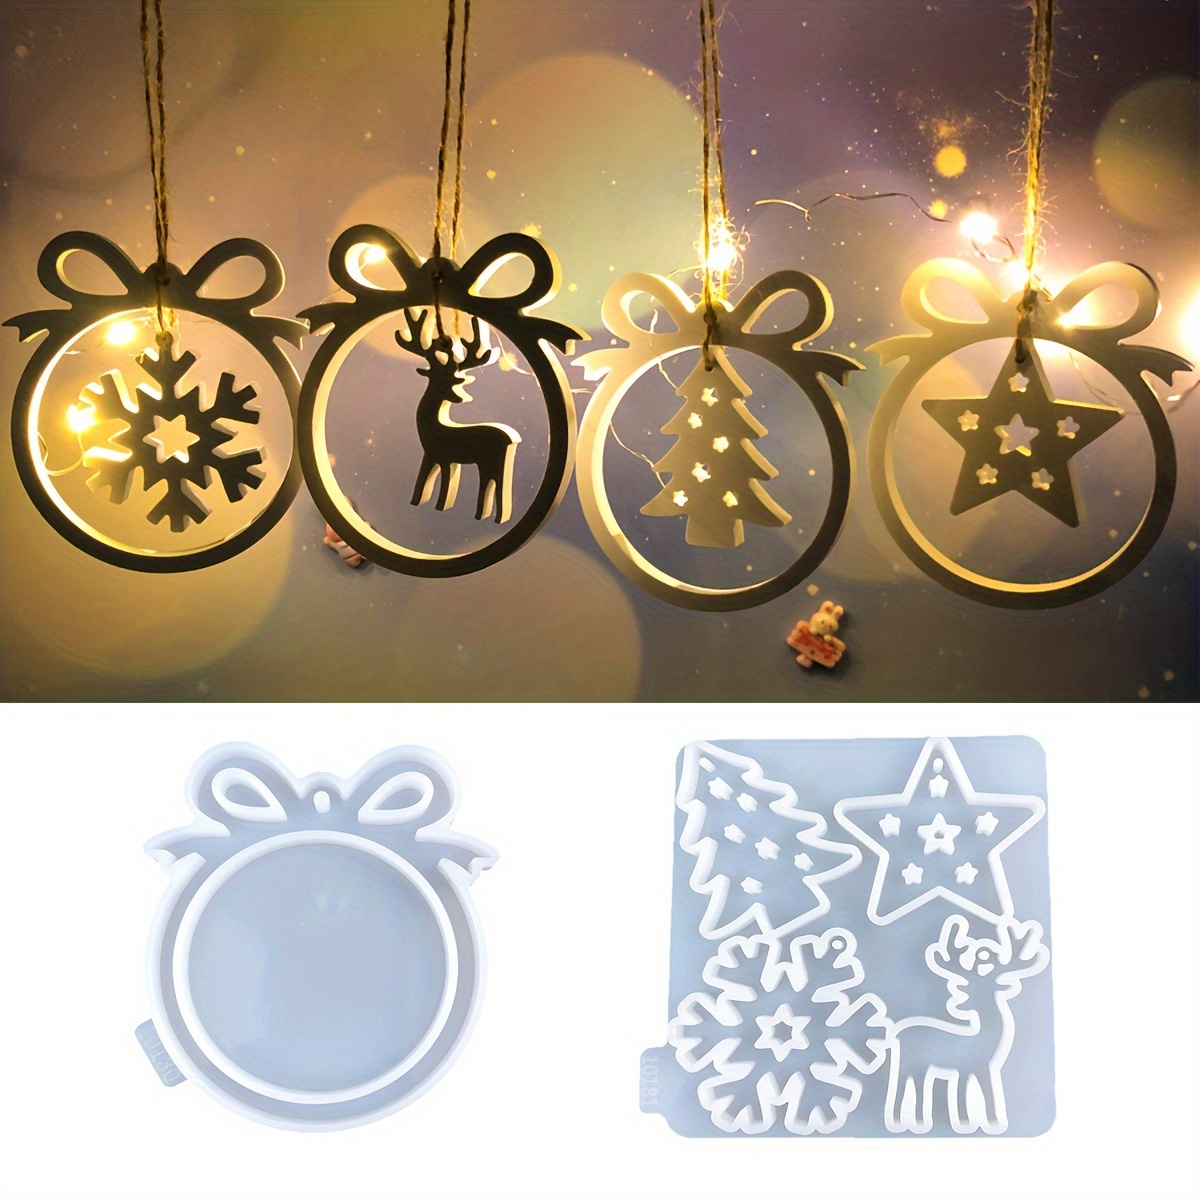 

2-piece Christmas Silicone Mold Set - Elk & Snowflake Designs For Diy Wall Hangings, Candlesticks & Home Decor Crafts